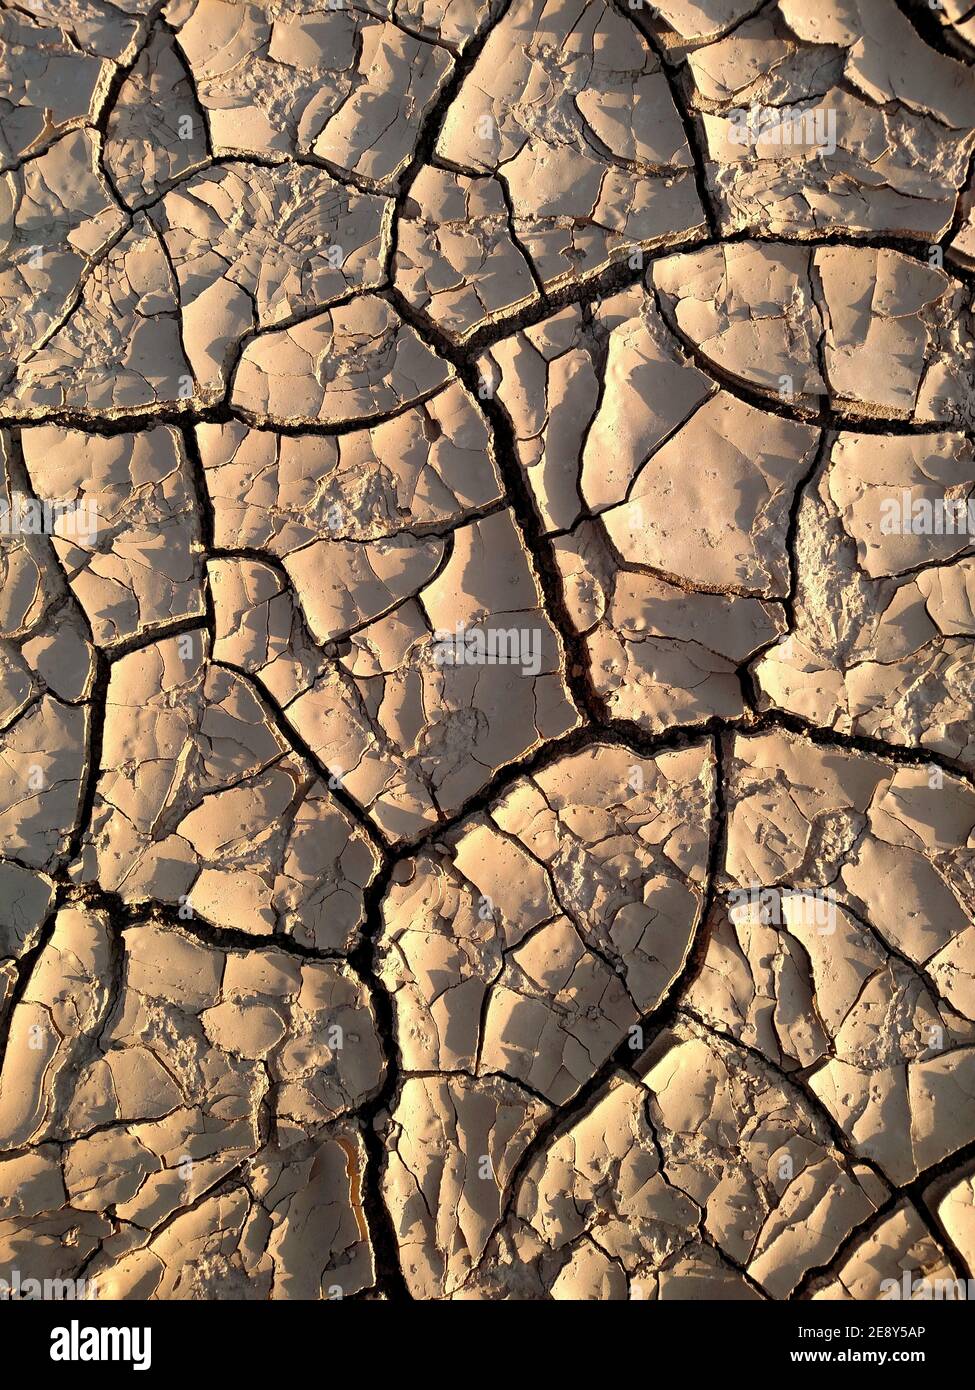 Image of cracked clay. Texture for background. Natural background for your design. Stock Photo